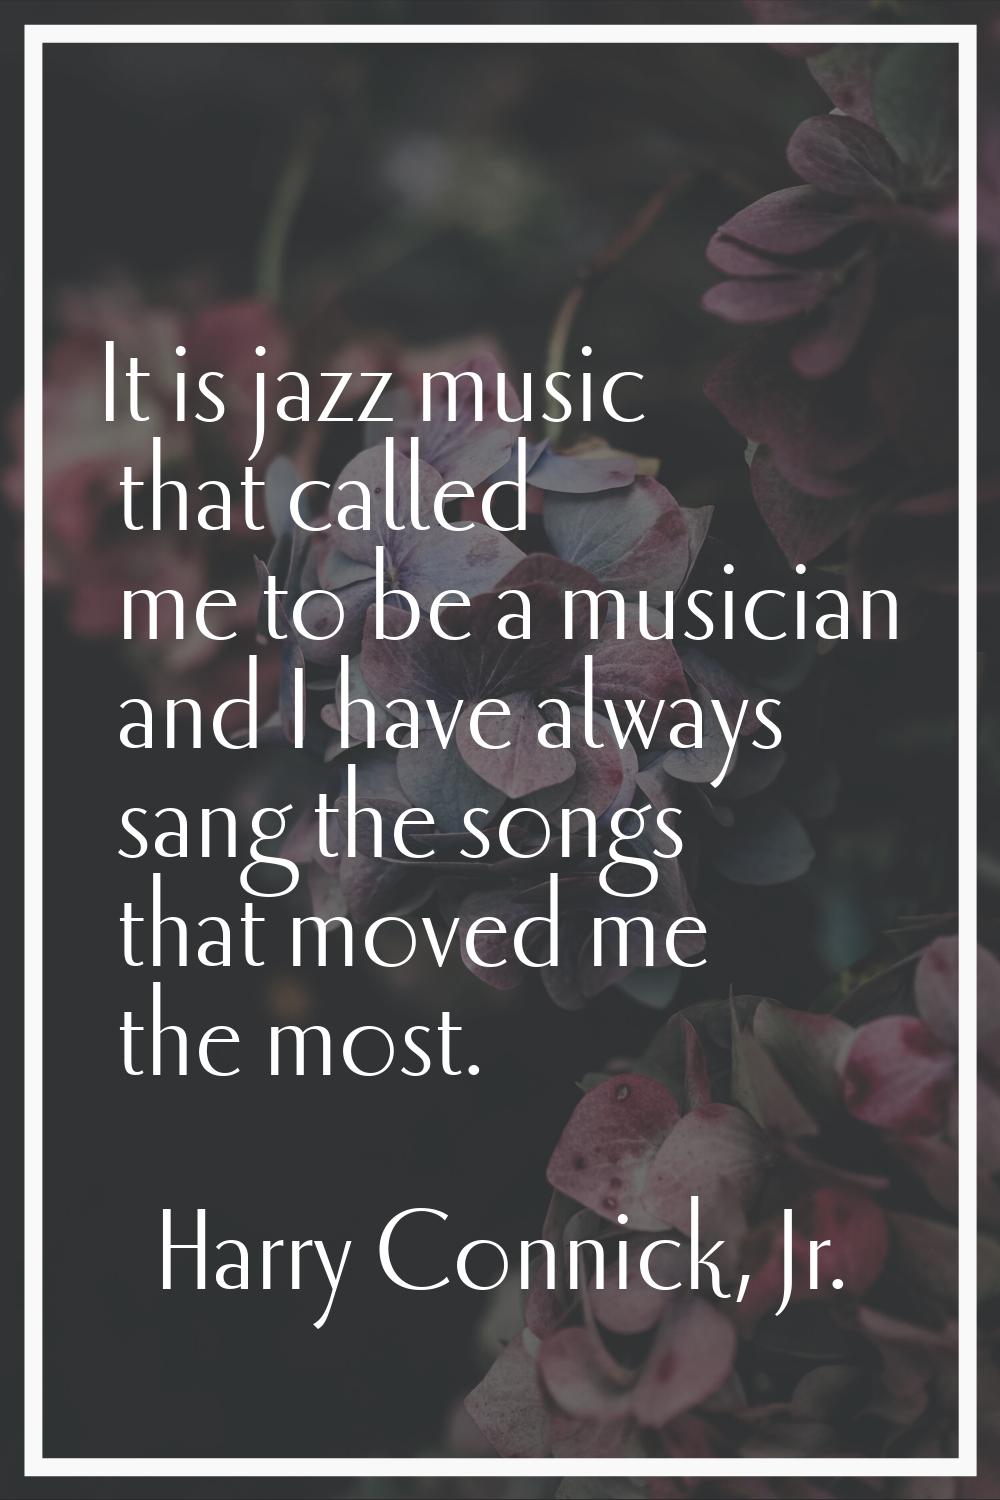 It is jazz music that called me to be a musician and I have always sang the songs that moved me the